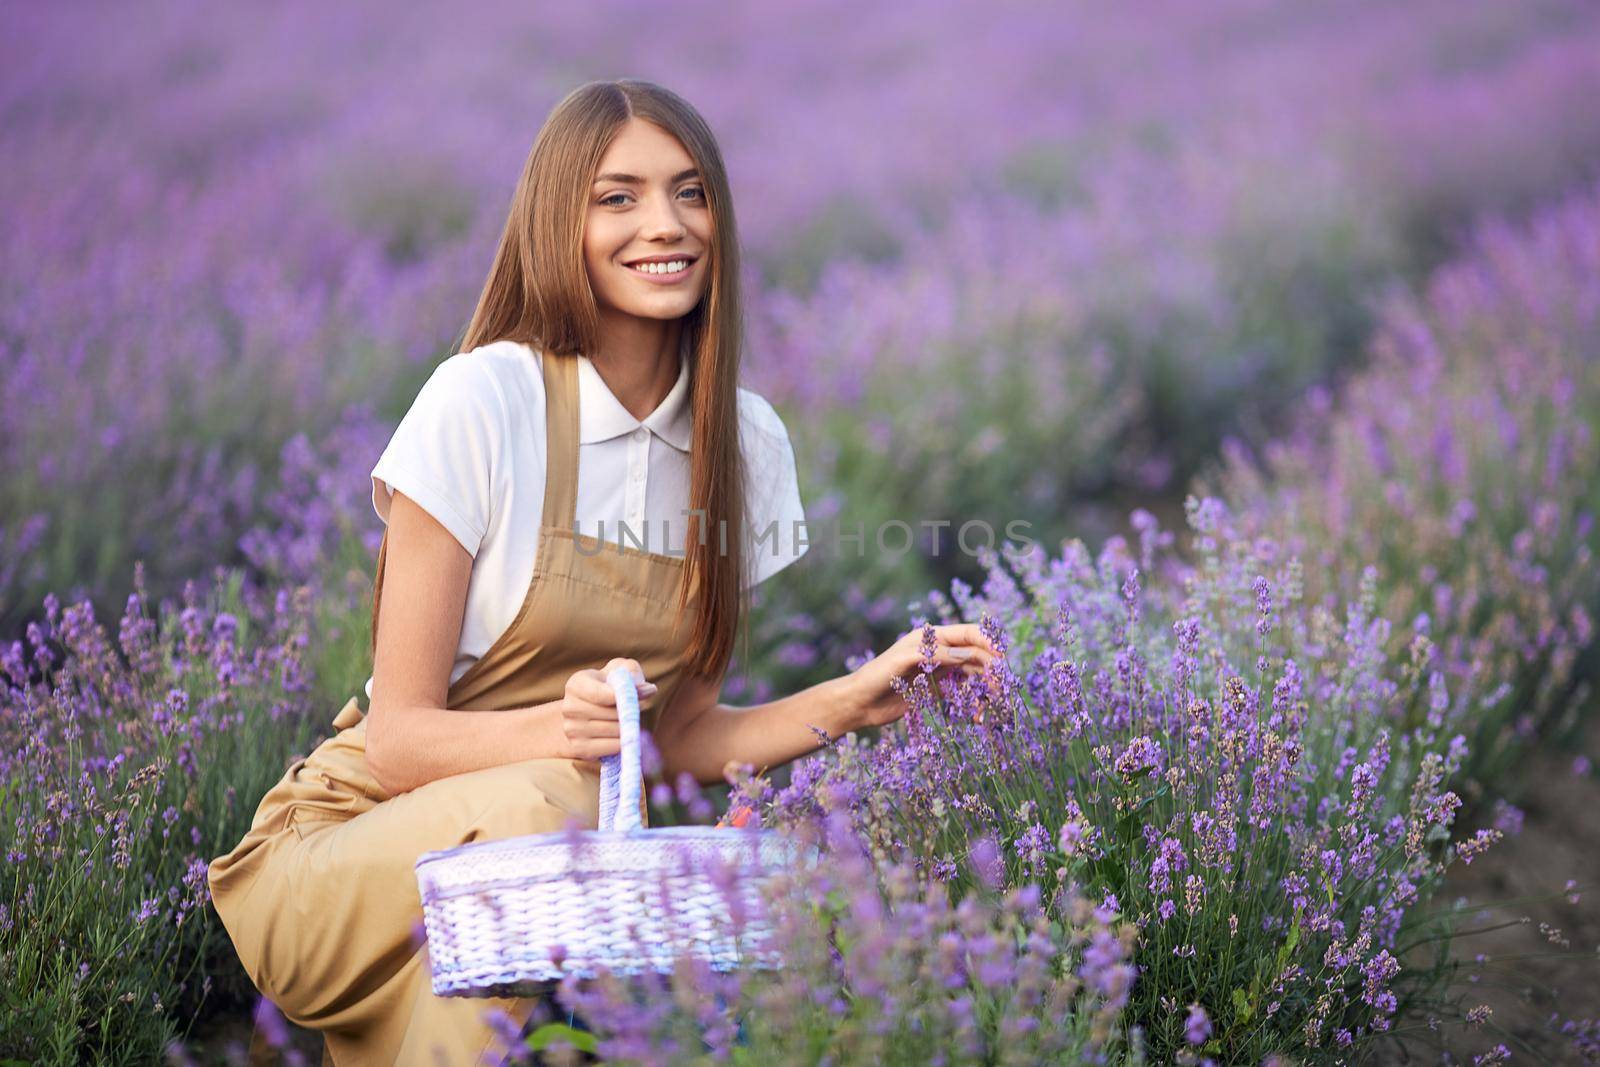 Portrait of stunning young smiling with teeth woman wearing farm outfit collecting lavender flowers, looking at camera. Girl holding basket, sitting in lavender field, endless patches on background.